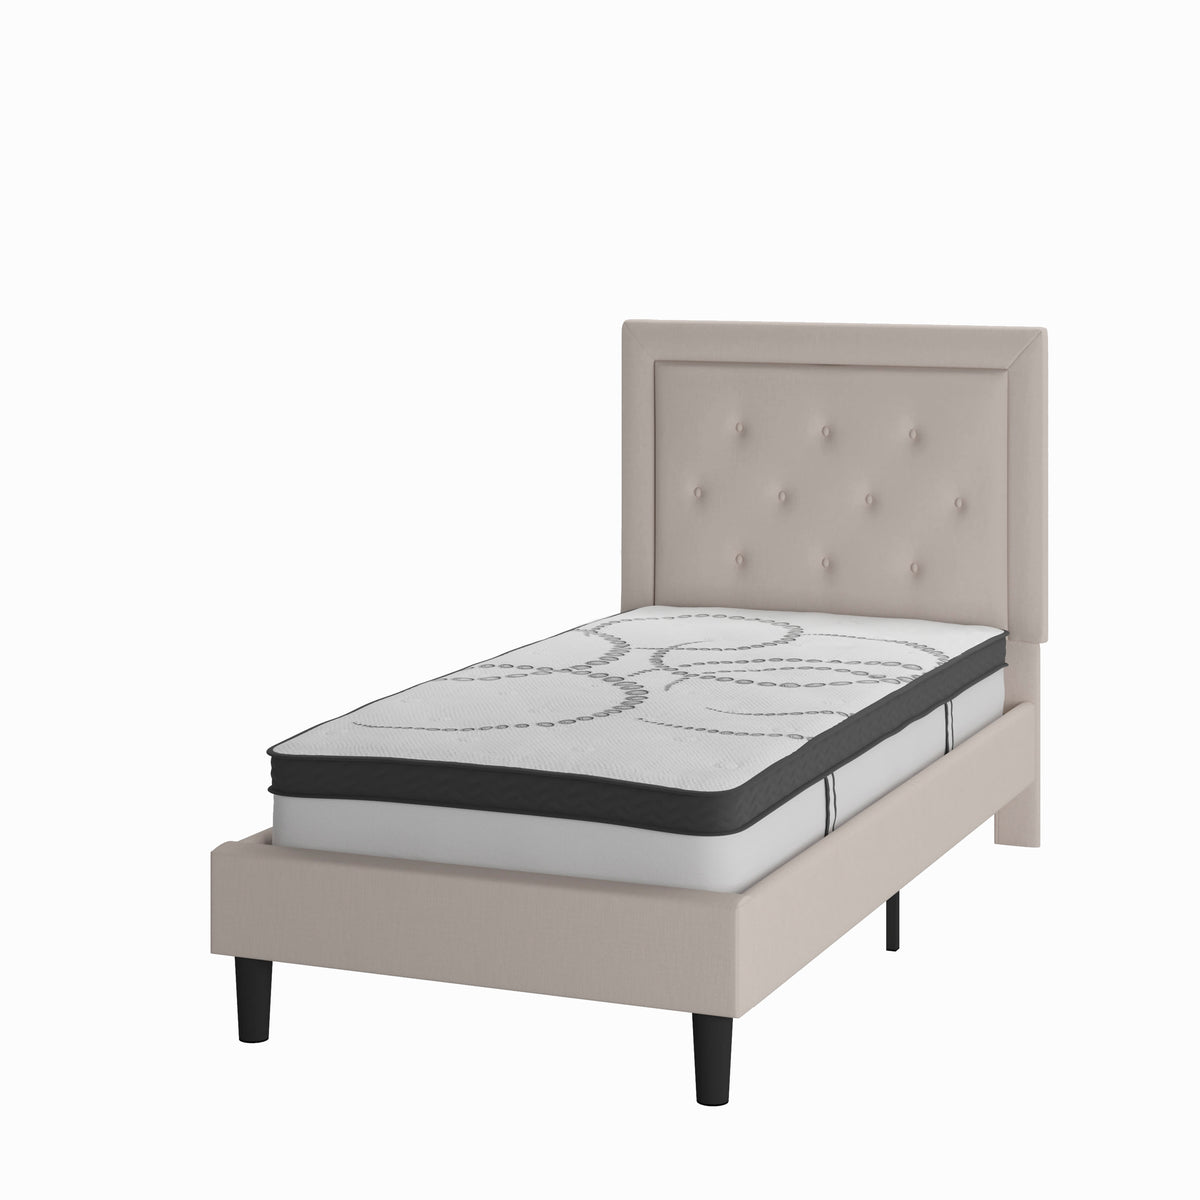 Beige,Twin |#| Twin Tufted Platform Bed in Beige Fabric with 10 Inch Pocket Spring Mattress